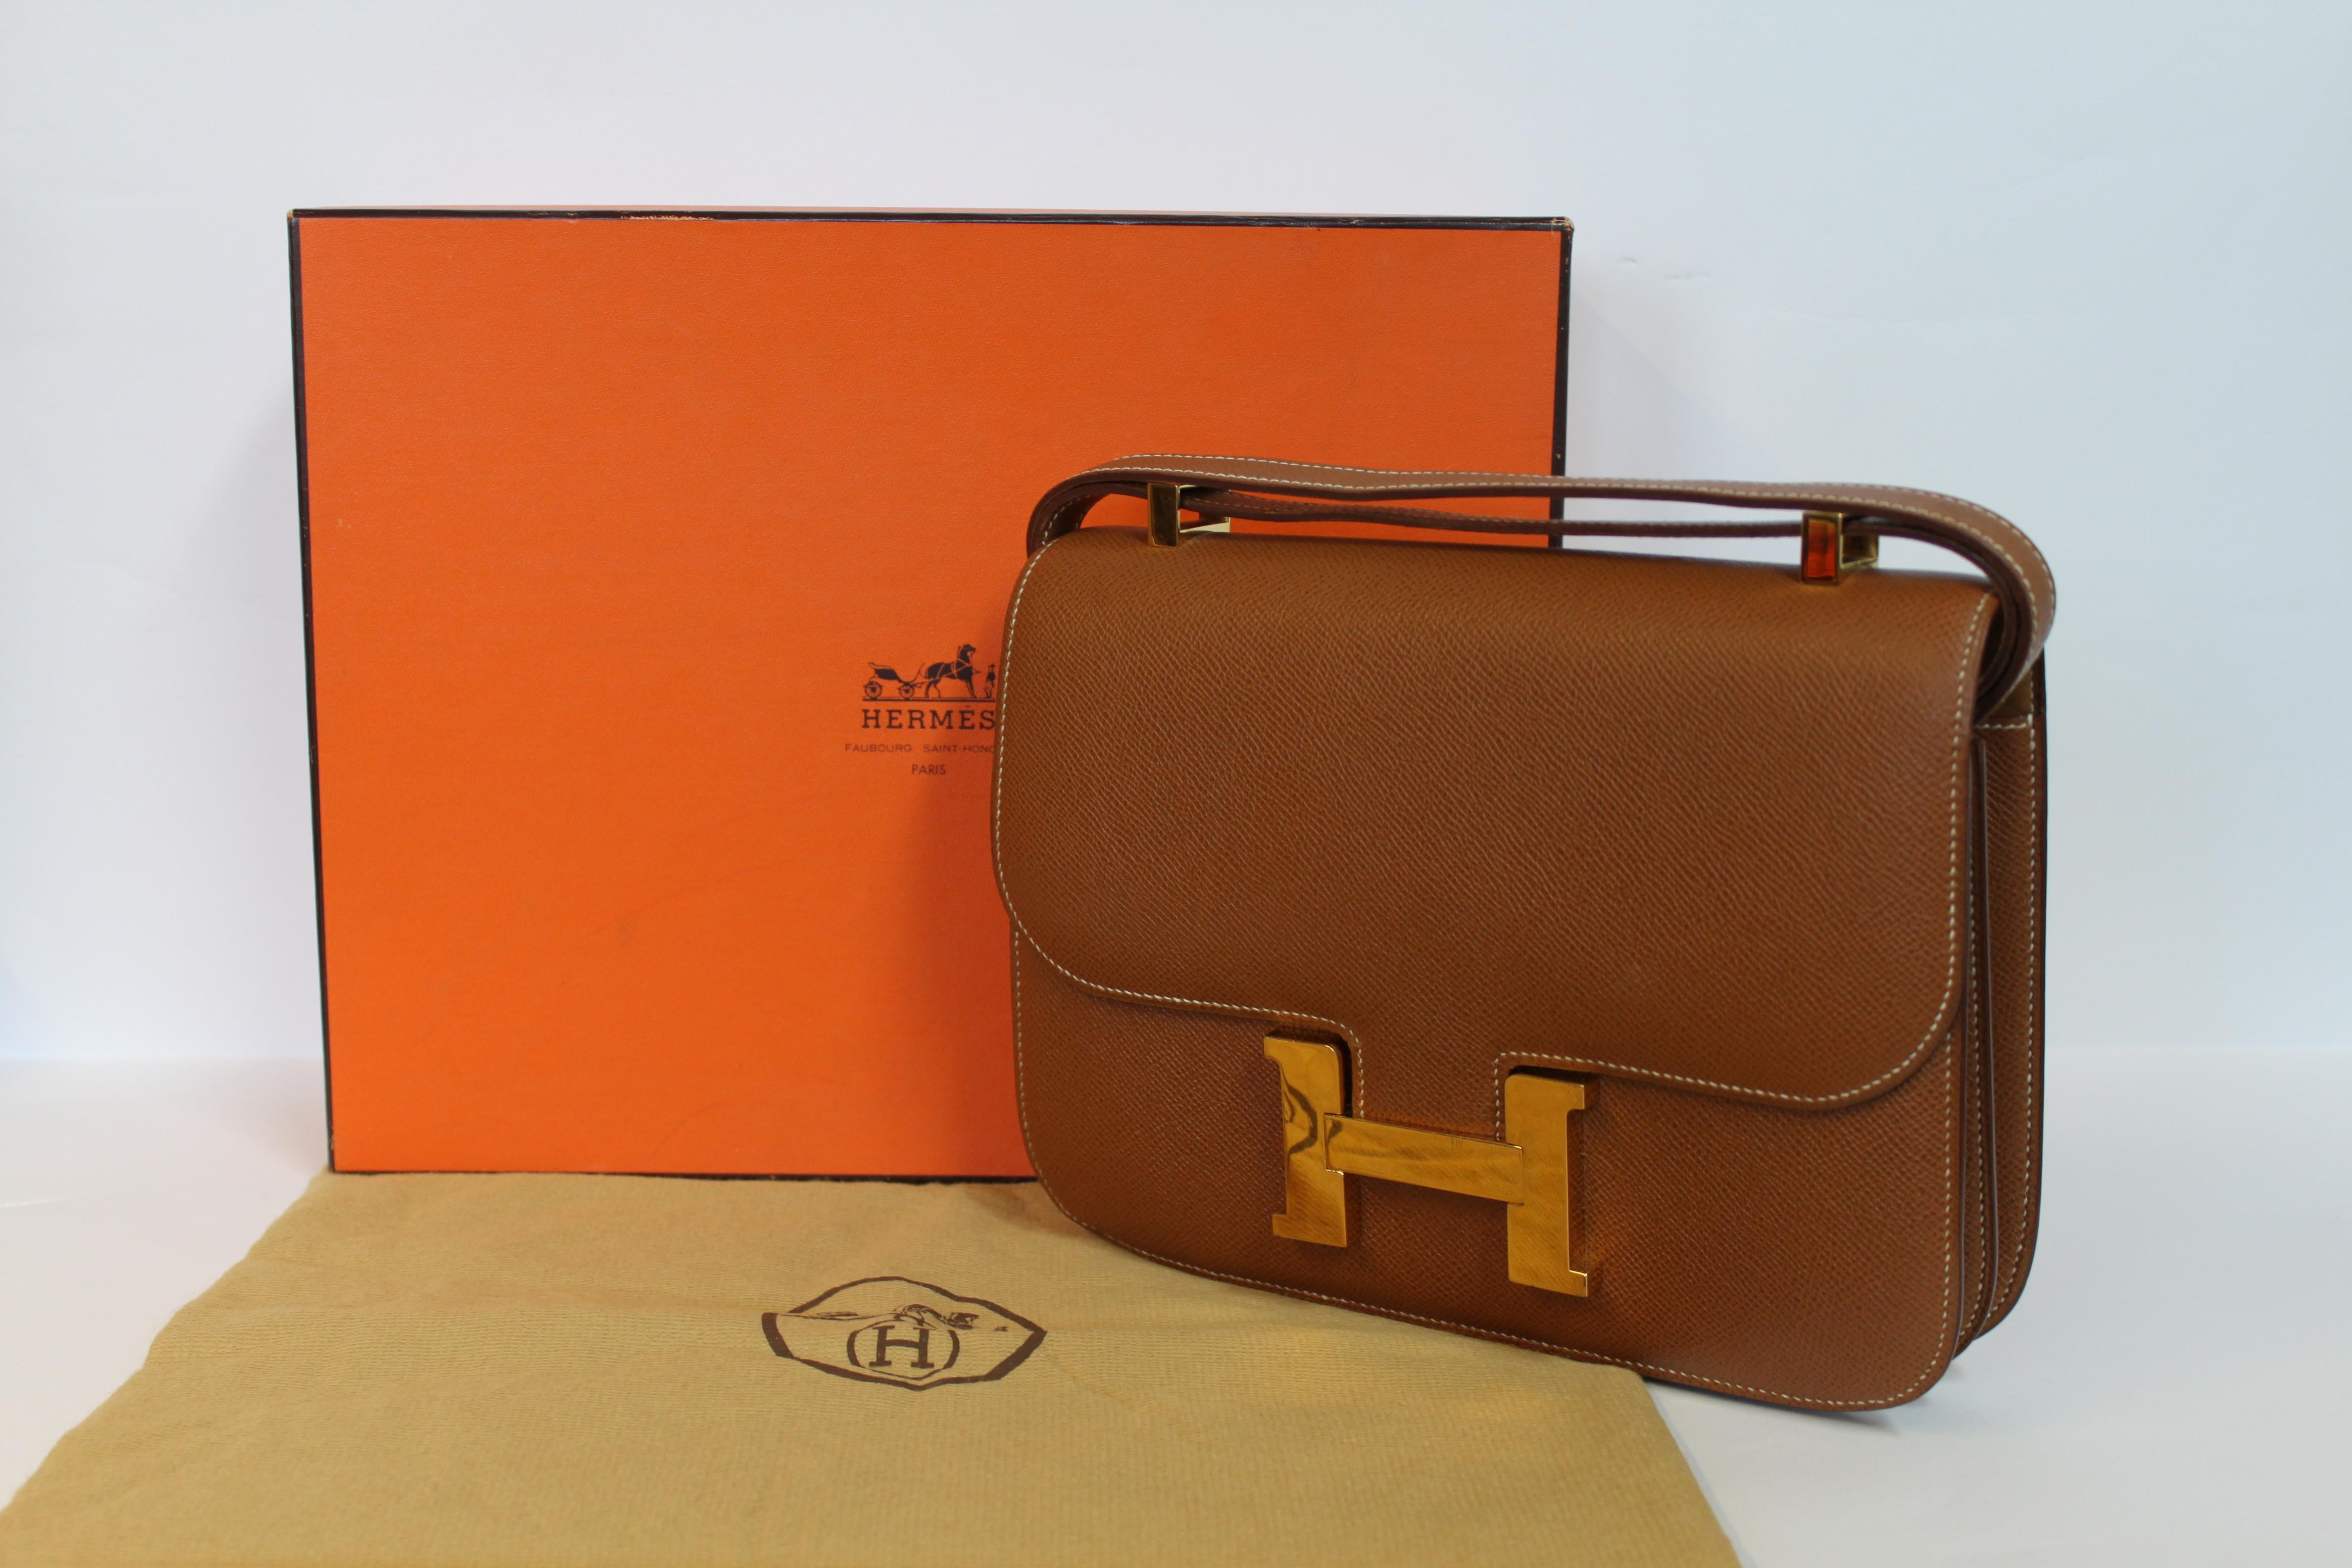 Iconic and timeless Hermes Constance 24 in brown epsom leather with gold hardware.
It comes with original dust bag, original box and certificate of authenticity.

Dimensions:
24 x 20 x 7 cm
9.4 x 7.8 x 2.7 inches

The bag has almost no signs of